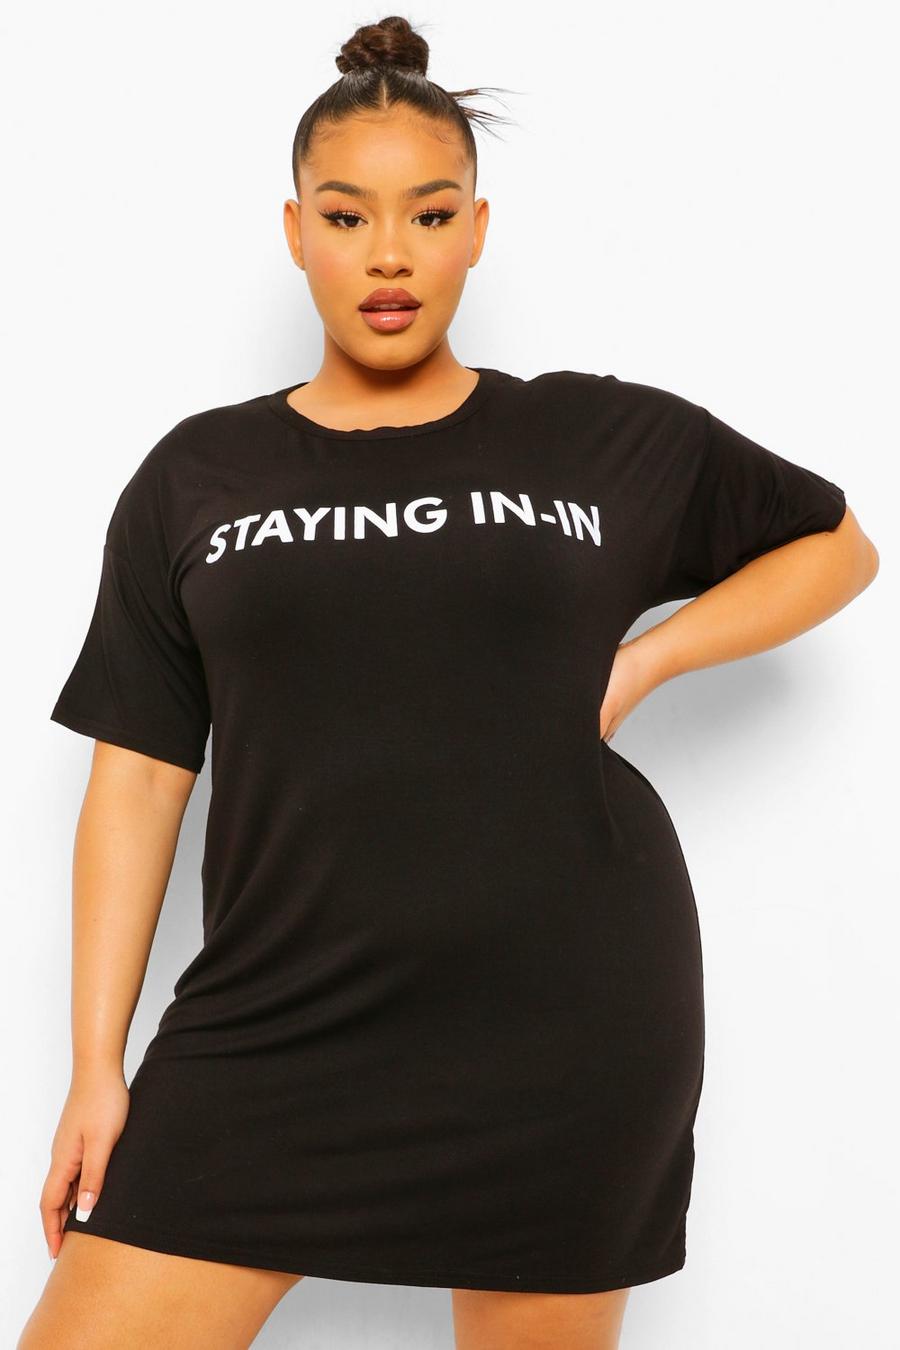 Grande taille - Robe t-shirt "Staying in" image number 1